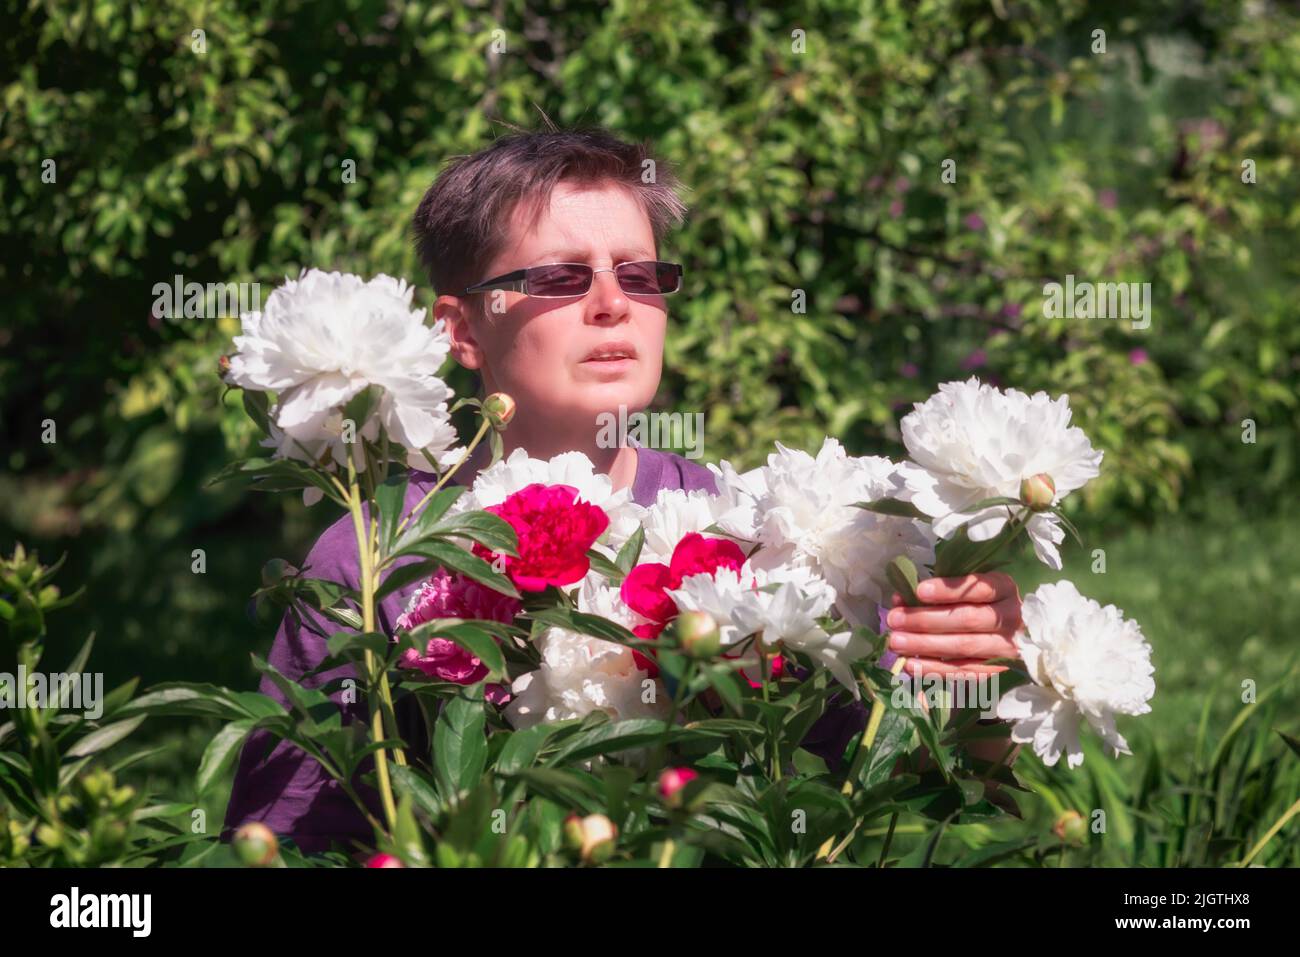 Woman in a garden with peonies collects a bouquet Stock Photo